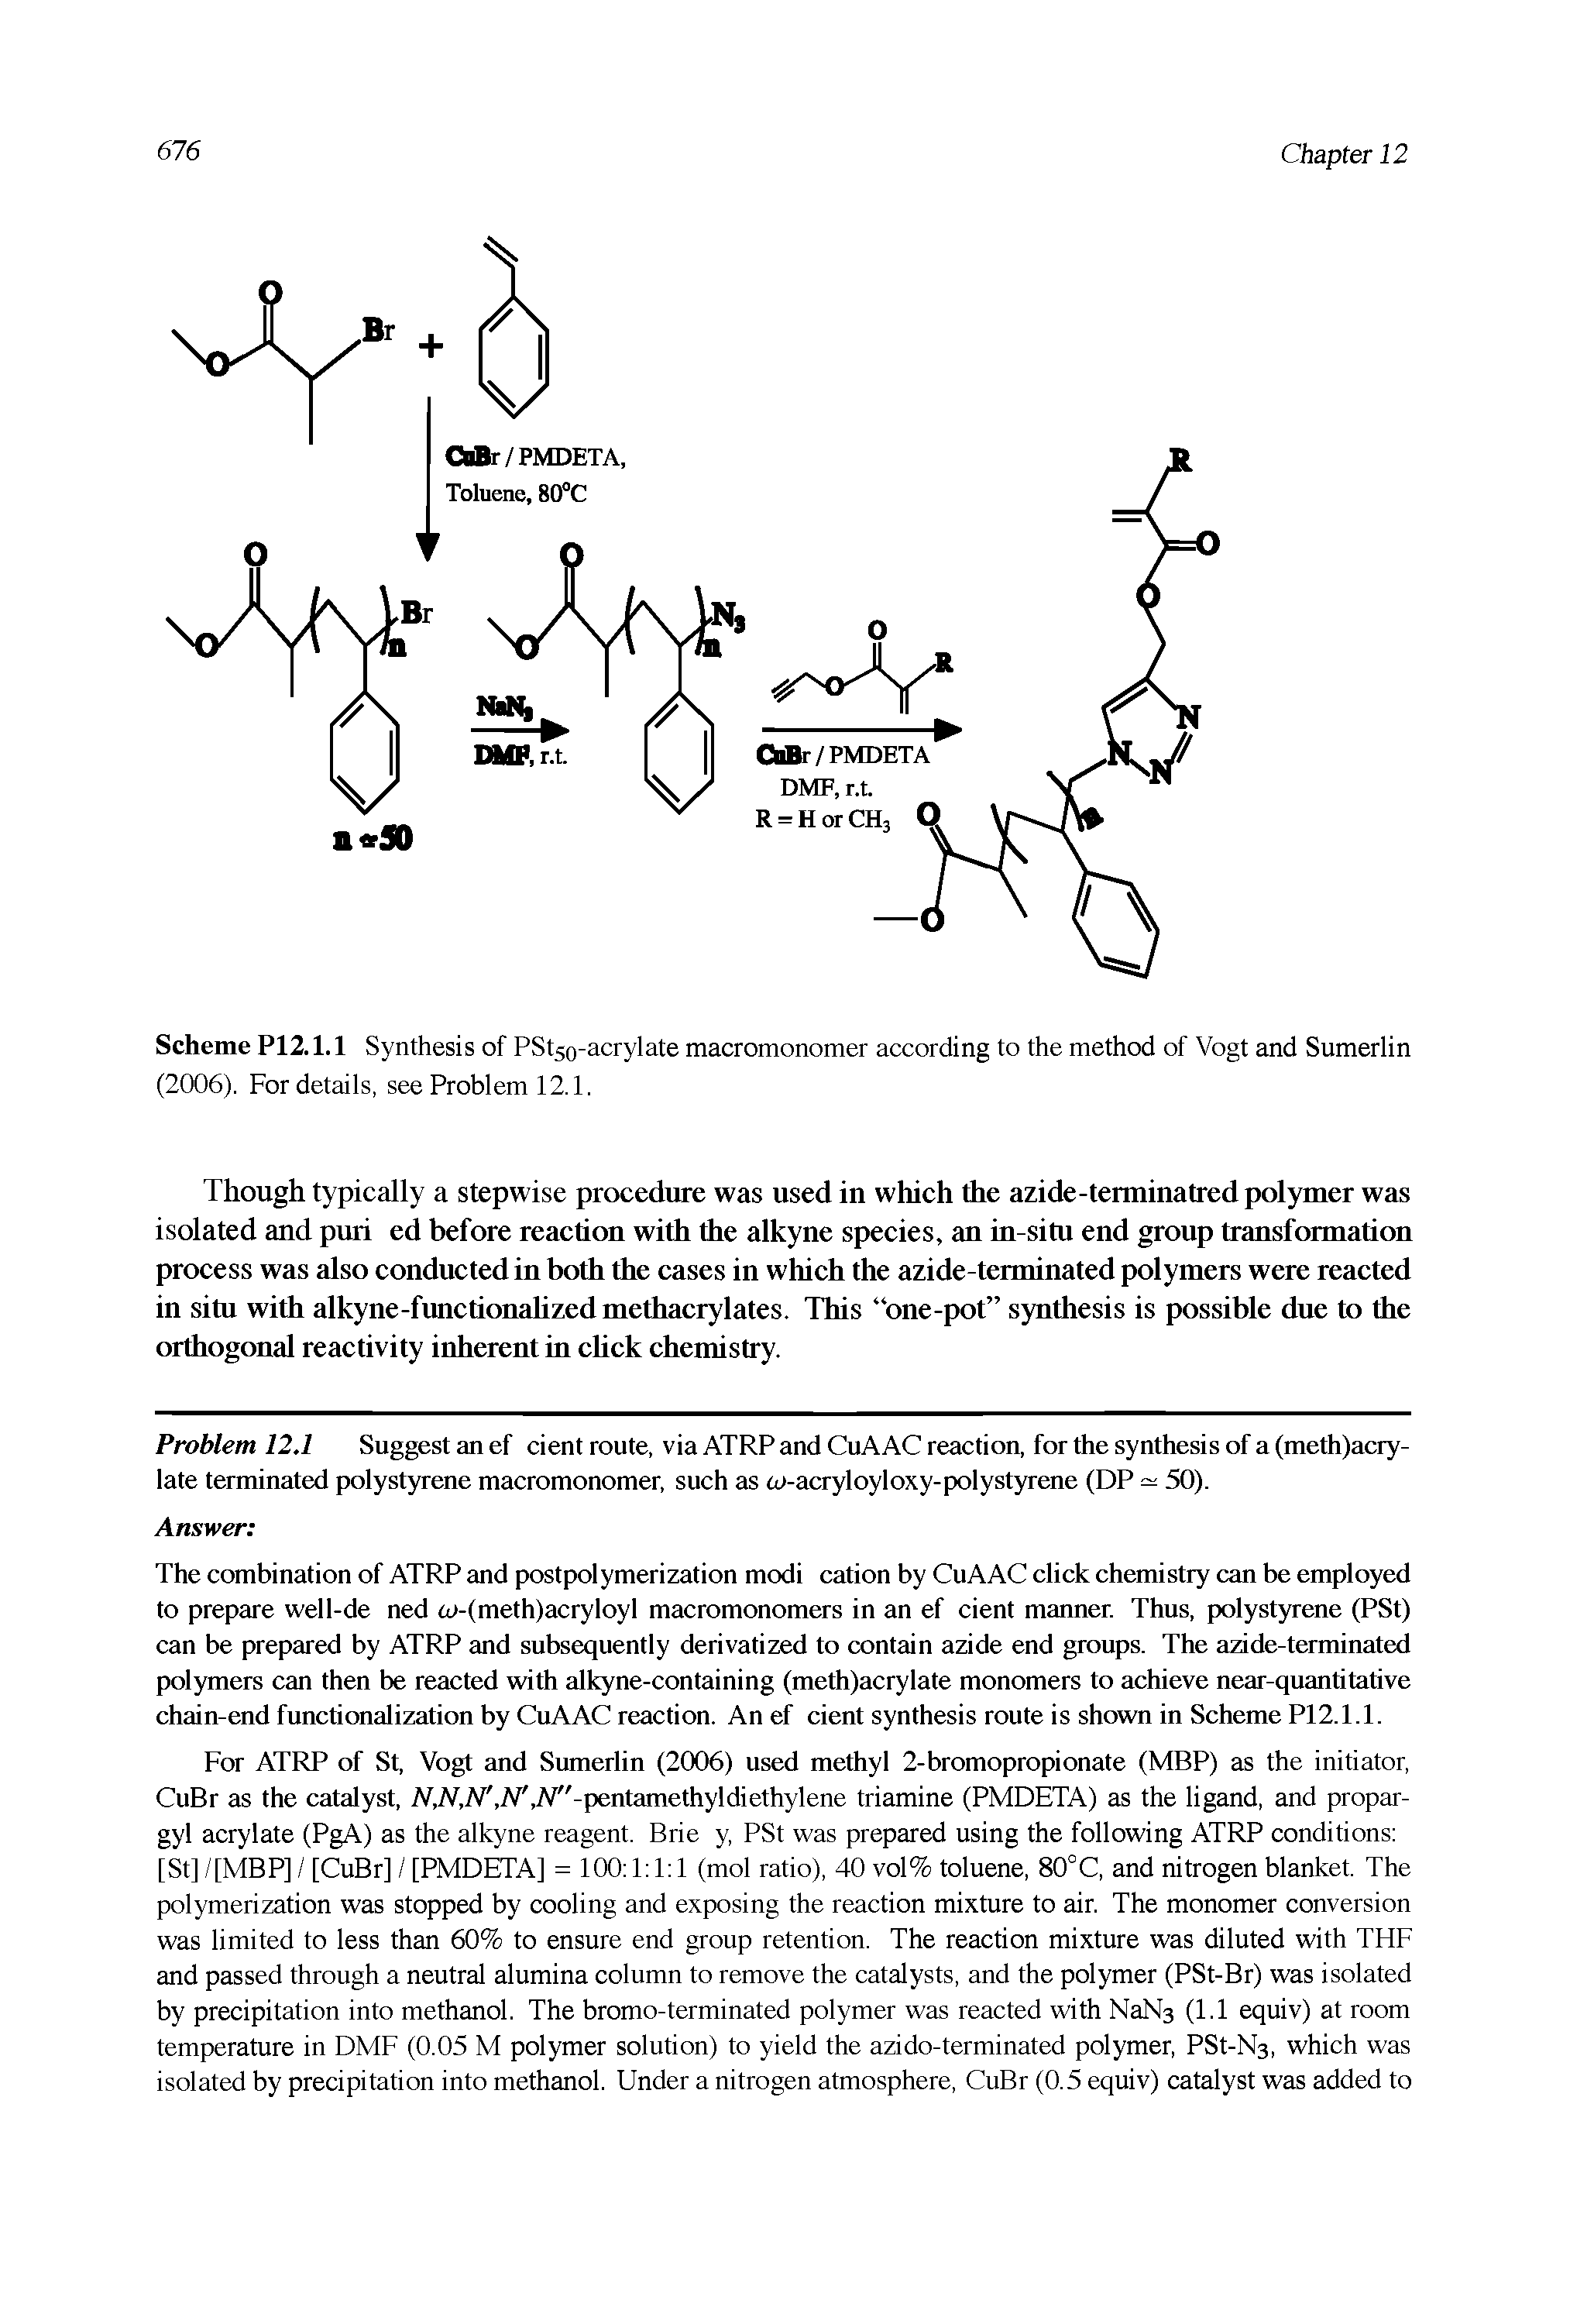 Scheme P12.1.1 Synthesis of PStsQ-acrylate macromonomer according to the method of Vogt and Sumerlin (2006). For details, see Problem 12.1.